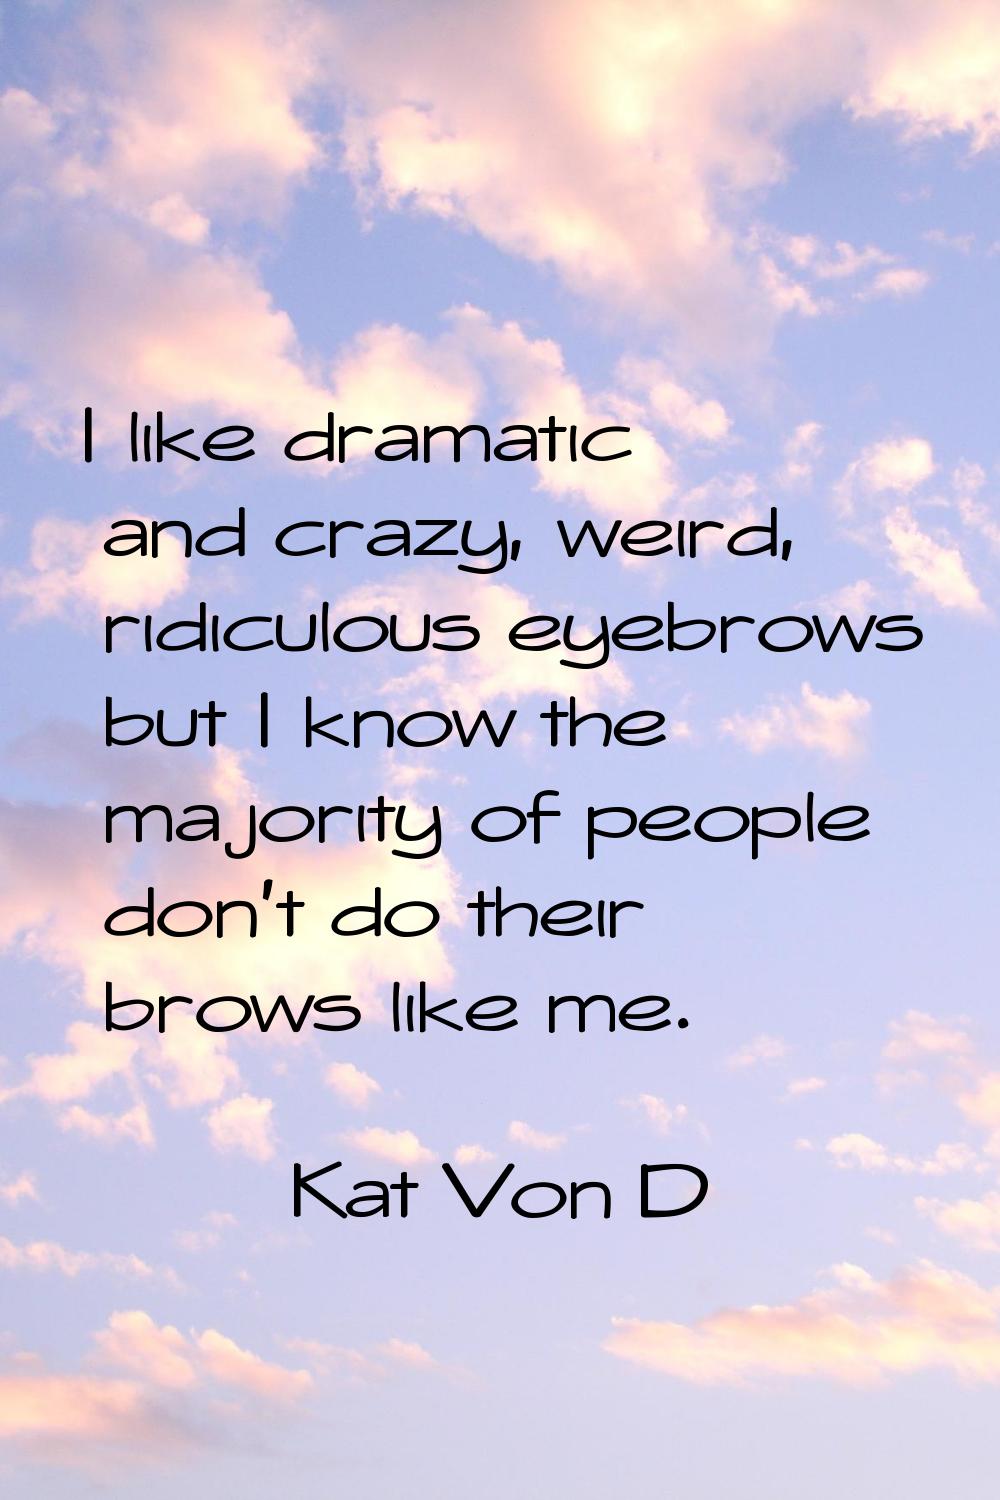 I like dramatic and crazy, weird, ridiculous eyebrows but I know the majority of people don't do th